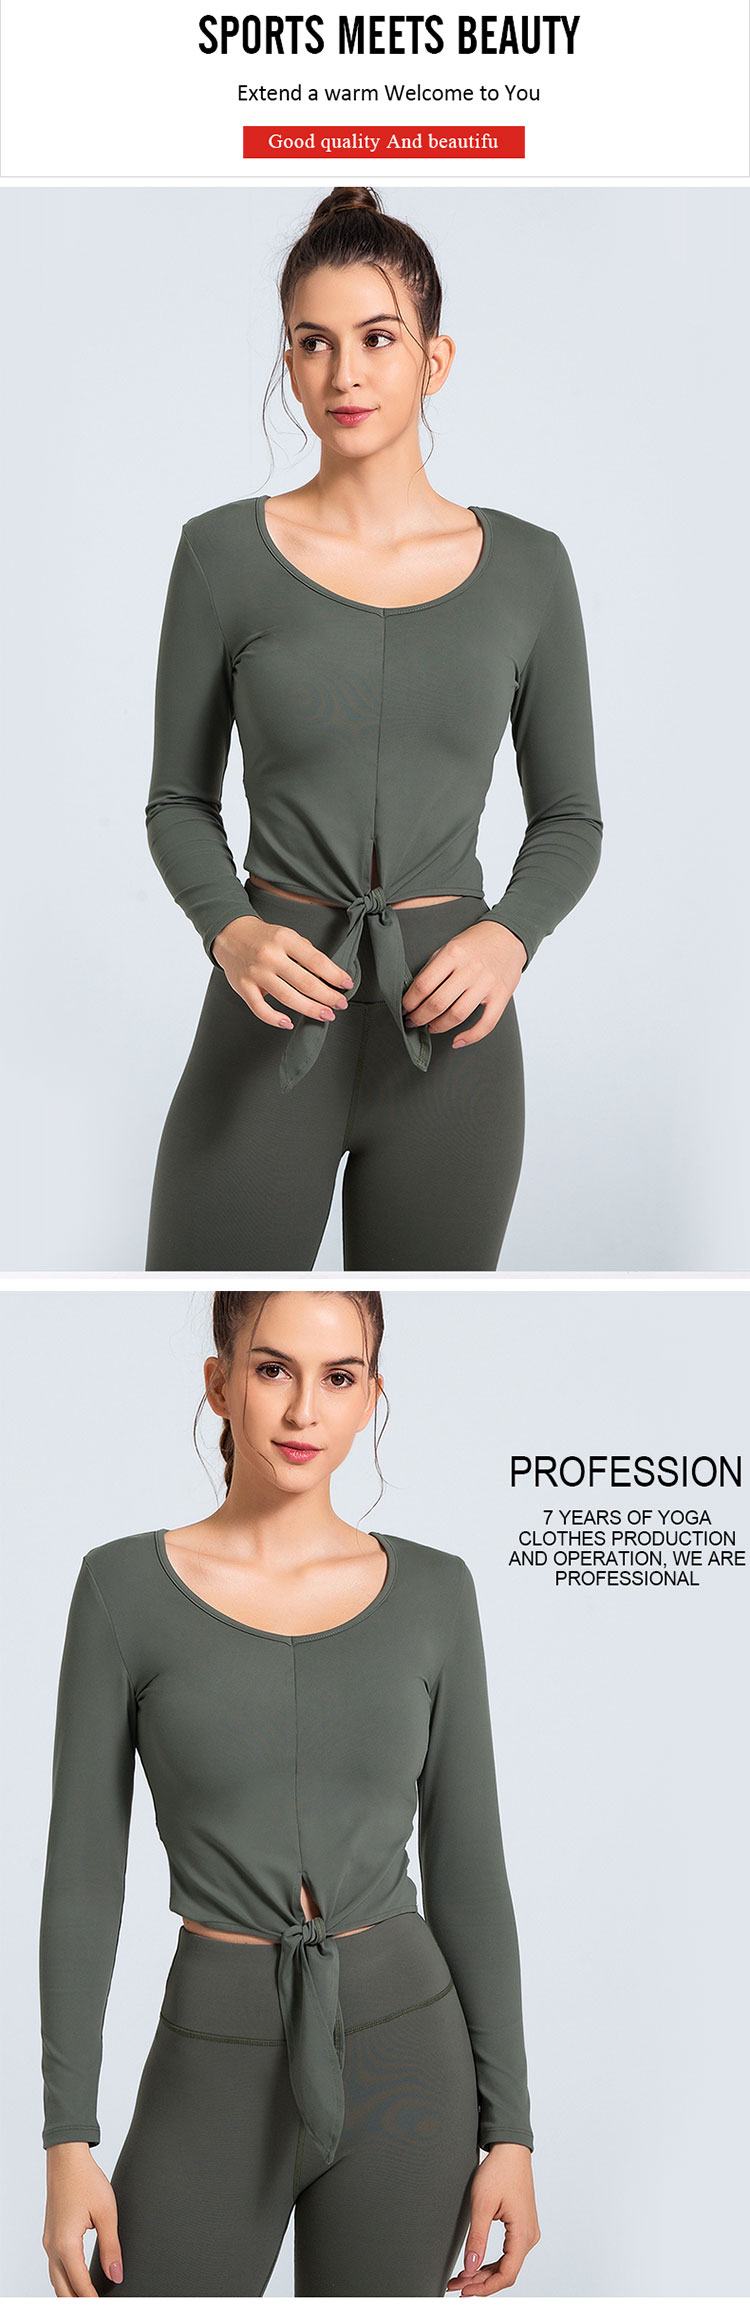 Profession 7 years of yoga clothes production and operation. we are professional